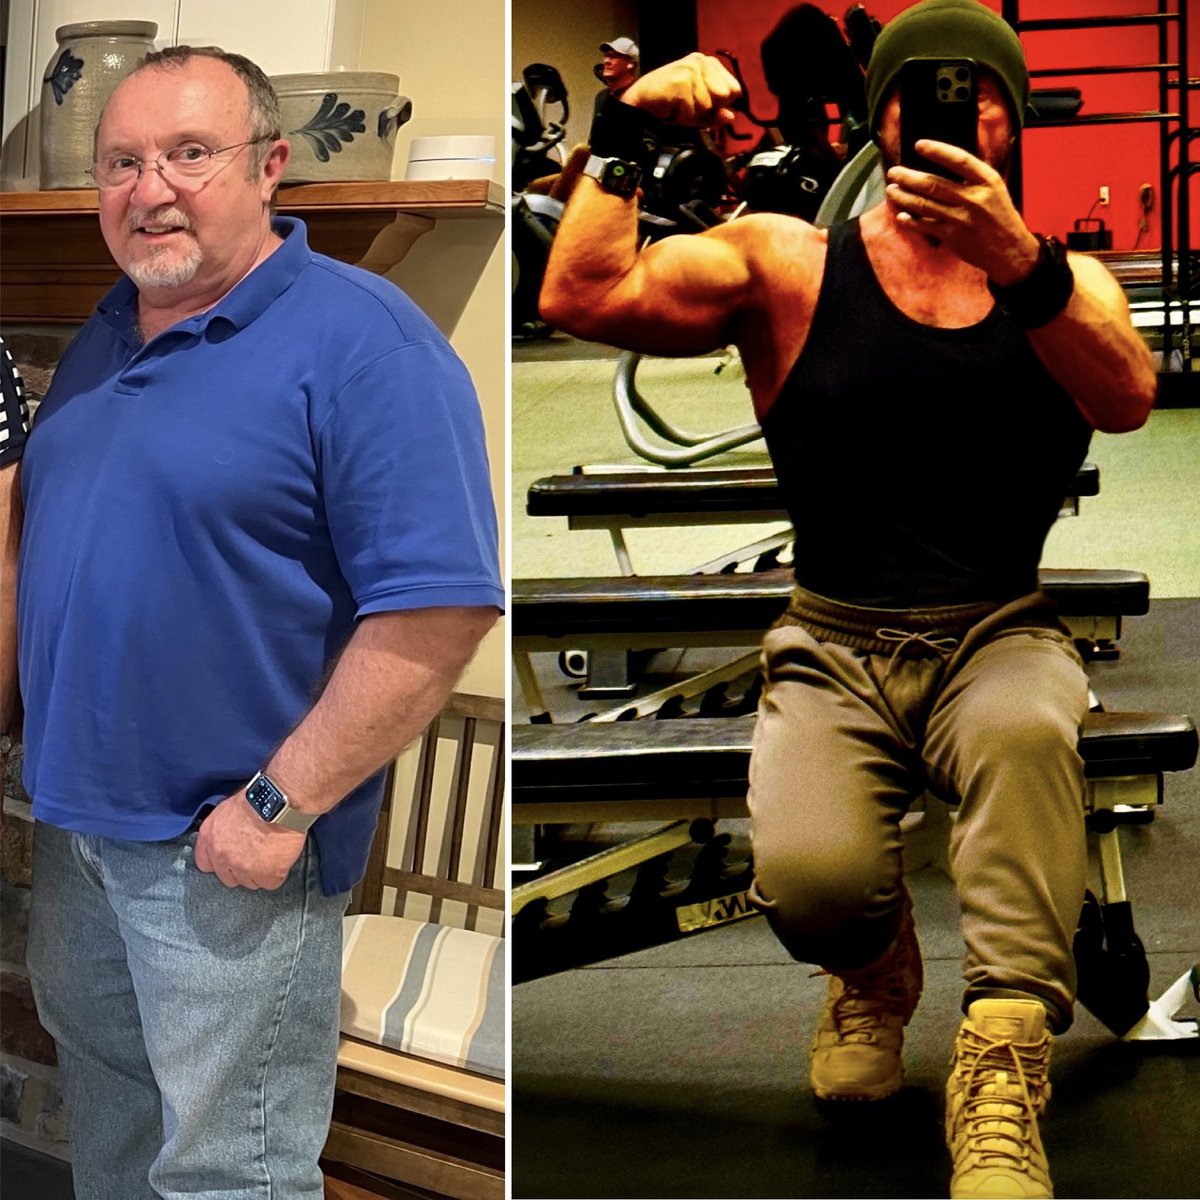 #FlexFriday
The first picture is when I was 14 years old in 1971, growing up on the family farm. I don’t think I weighed 100 pounds. I was a skinny shy kid back then. 

The second picture is 1997 and I was 40 years old. I think I weighed 150 pounds here. I’d been lifting off and